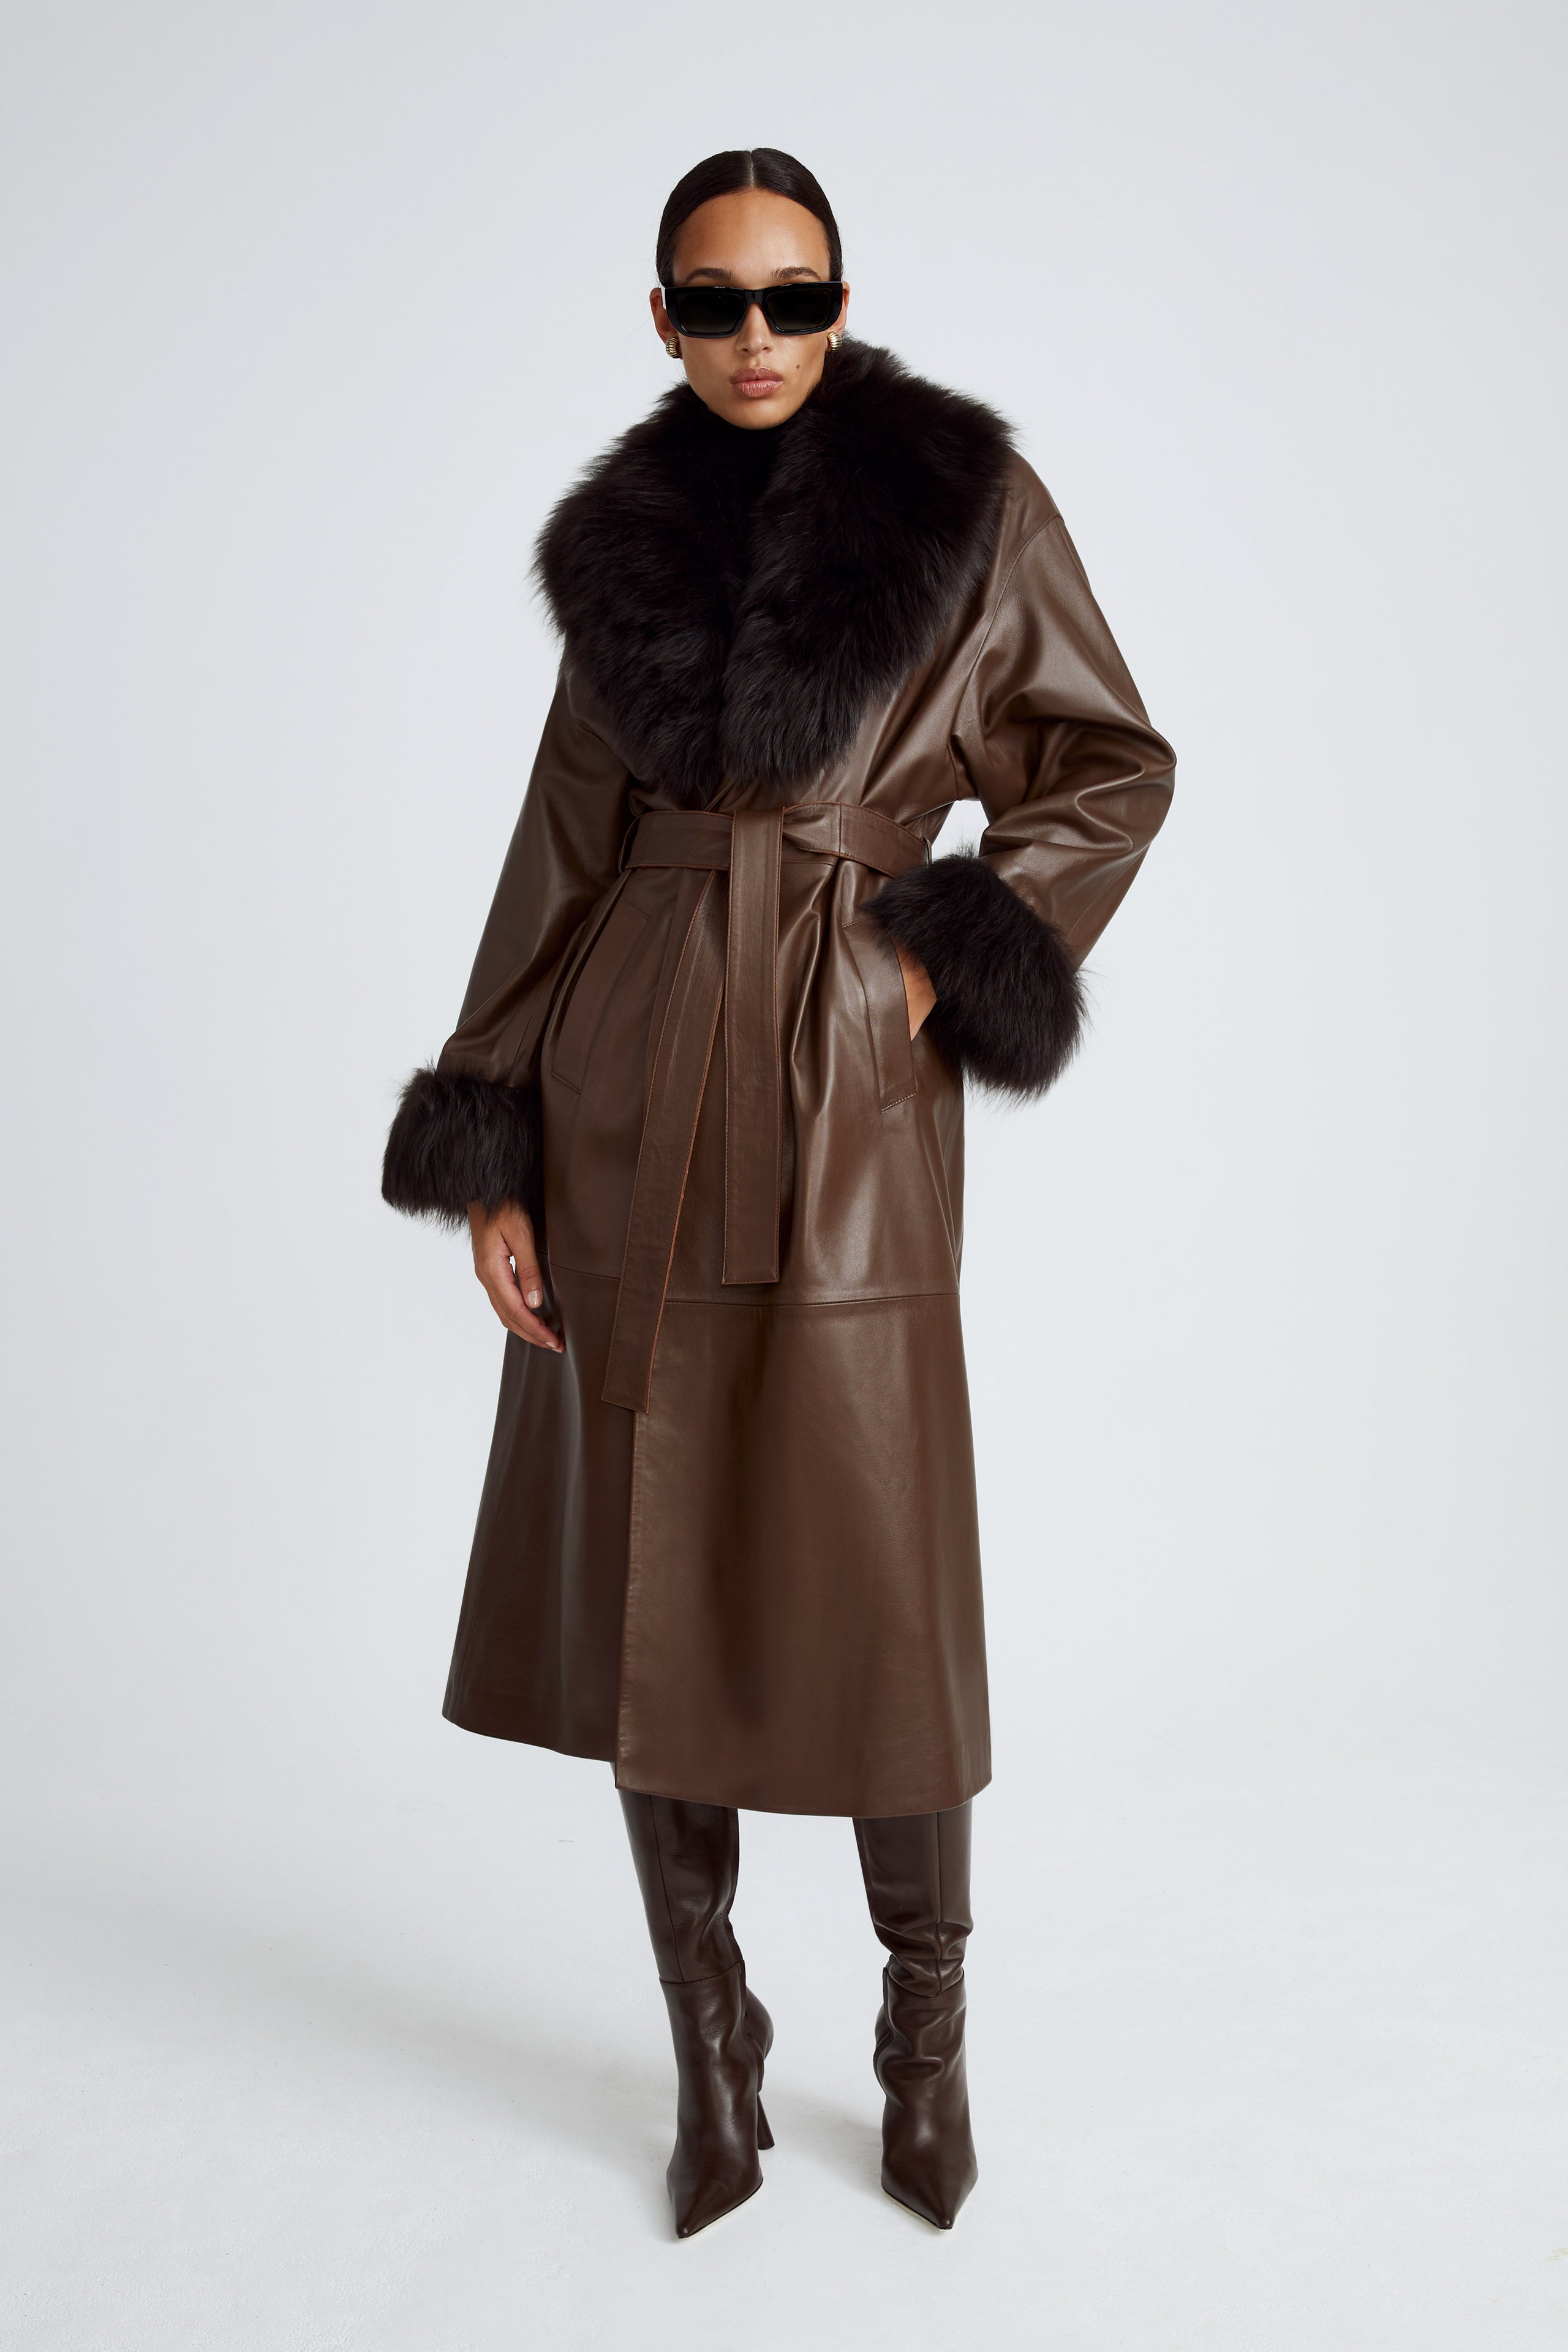 Model is wearing the Freja Walnut Espresso Luxurious Leather Trench Front